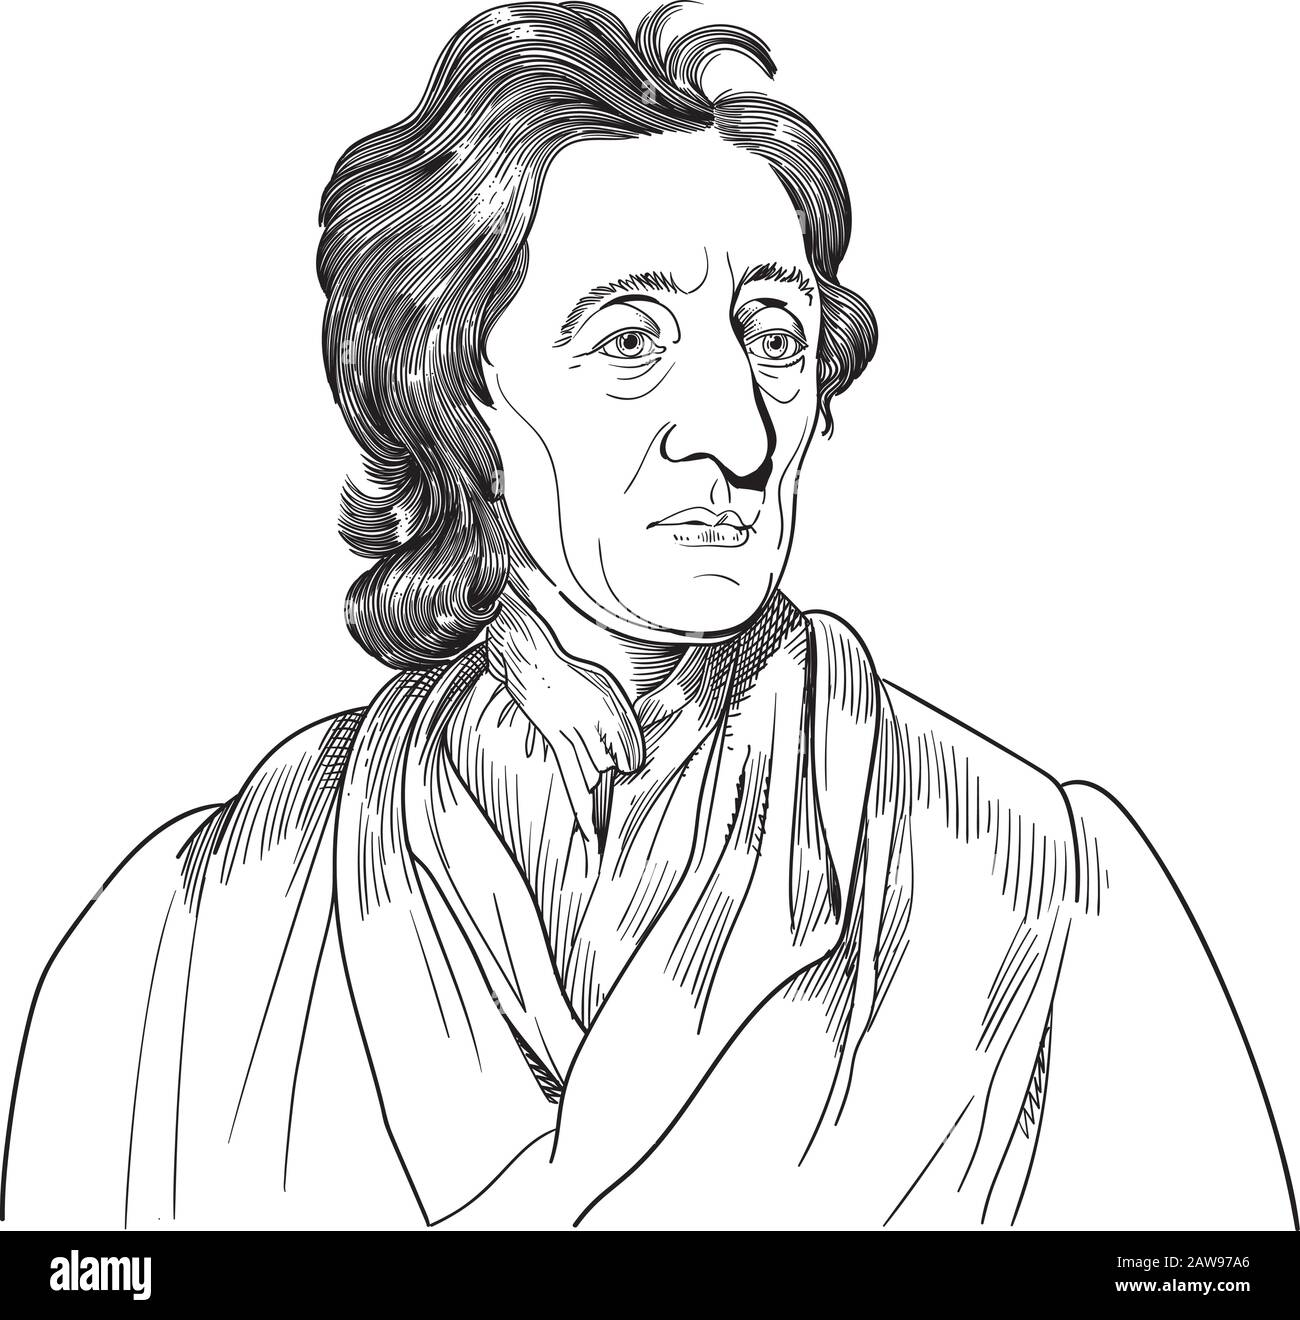 John Locke known as the Father of Liberalism, was an English philosopher and physician. Locke's theoriesillustration, drawing, sketch, engrawed were u Stock Vector